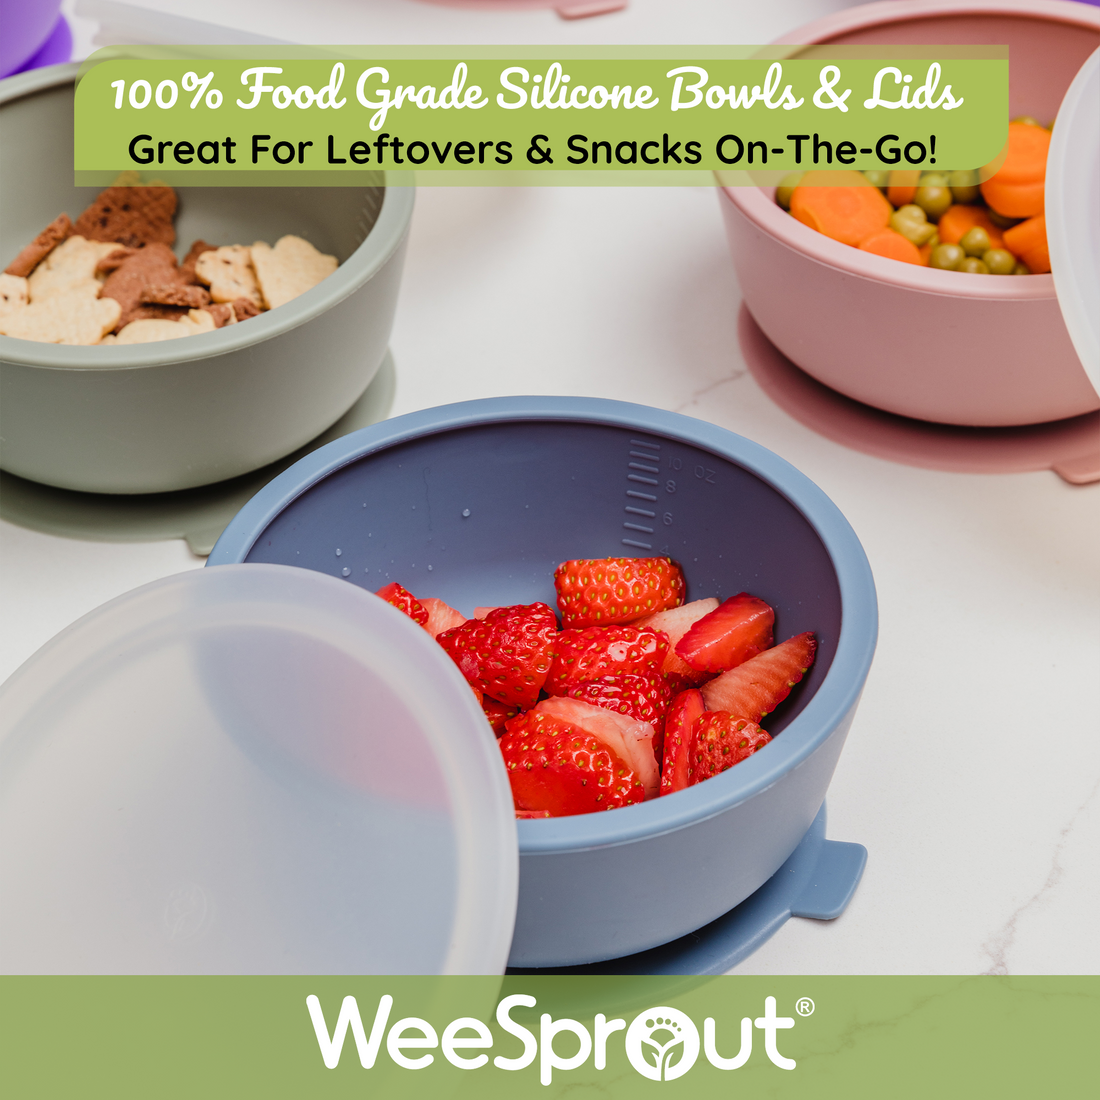 Silicone Suction Bowls With Premium Hard Plastic Lids